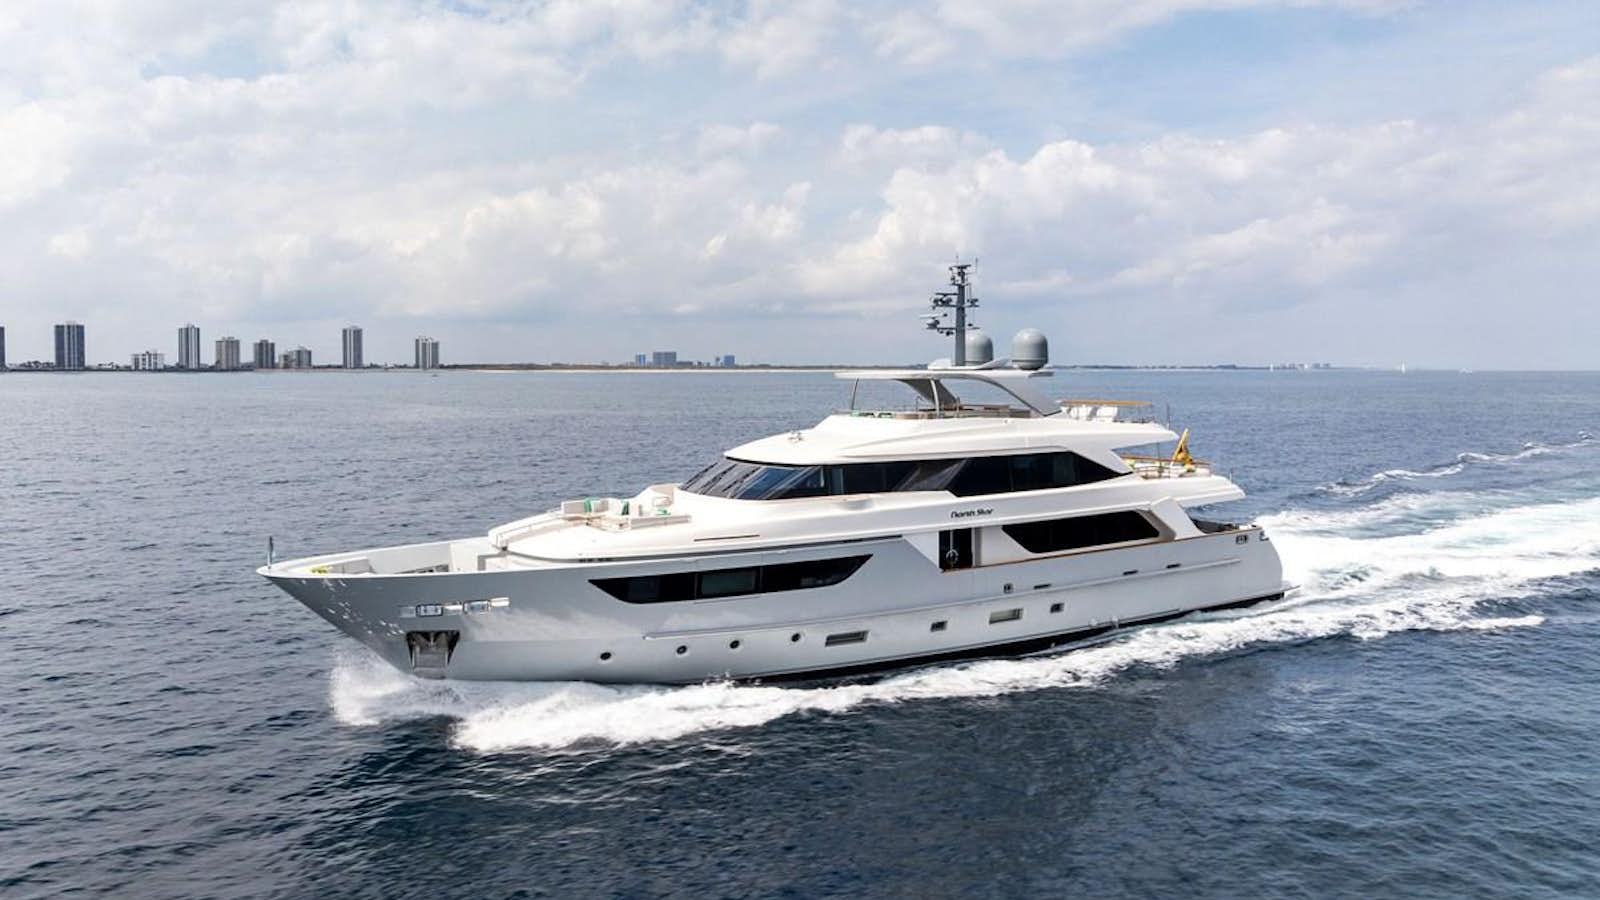 North star
Yacht for Sale